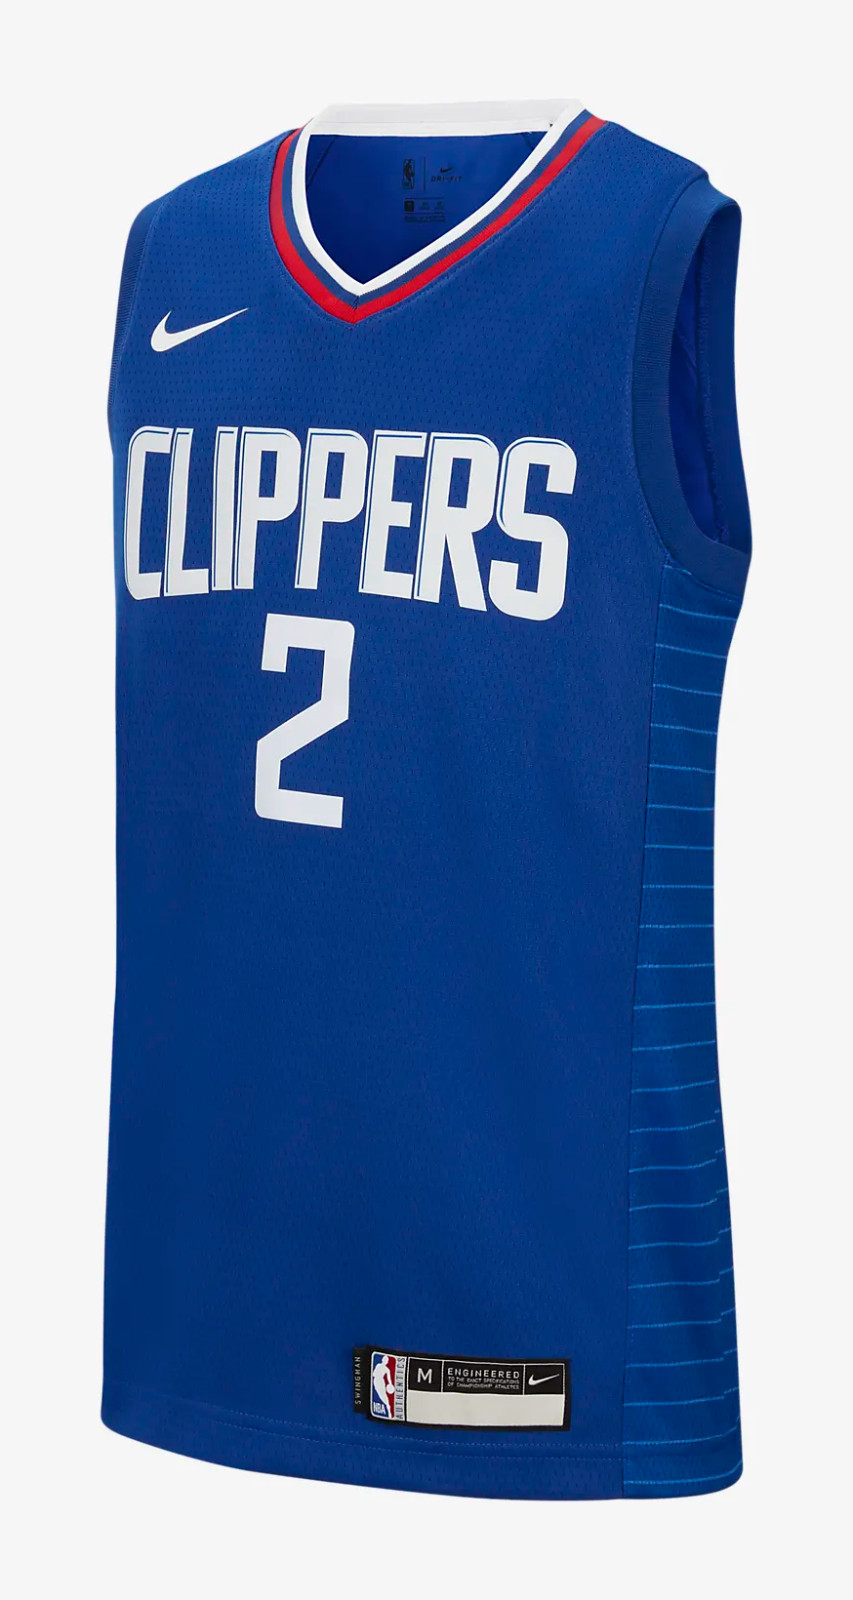 2018-19 Clippers City Edition Clippers Jersey Unveil